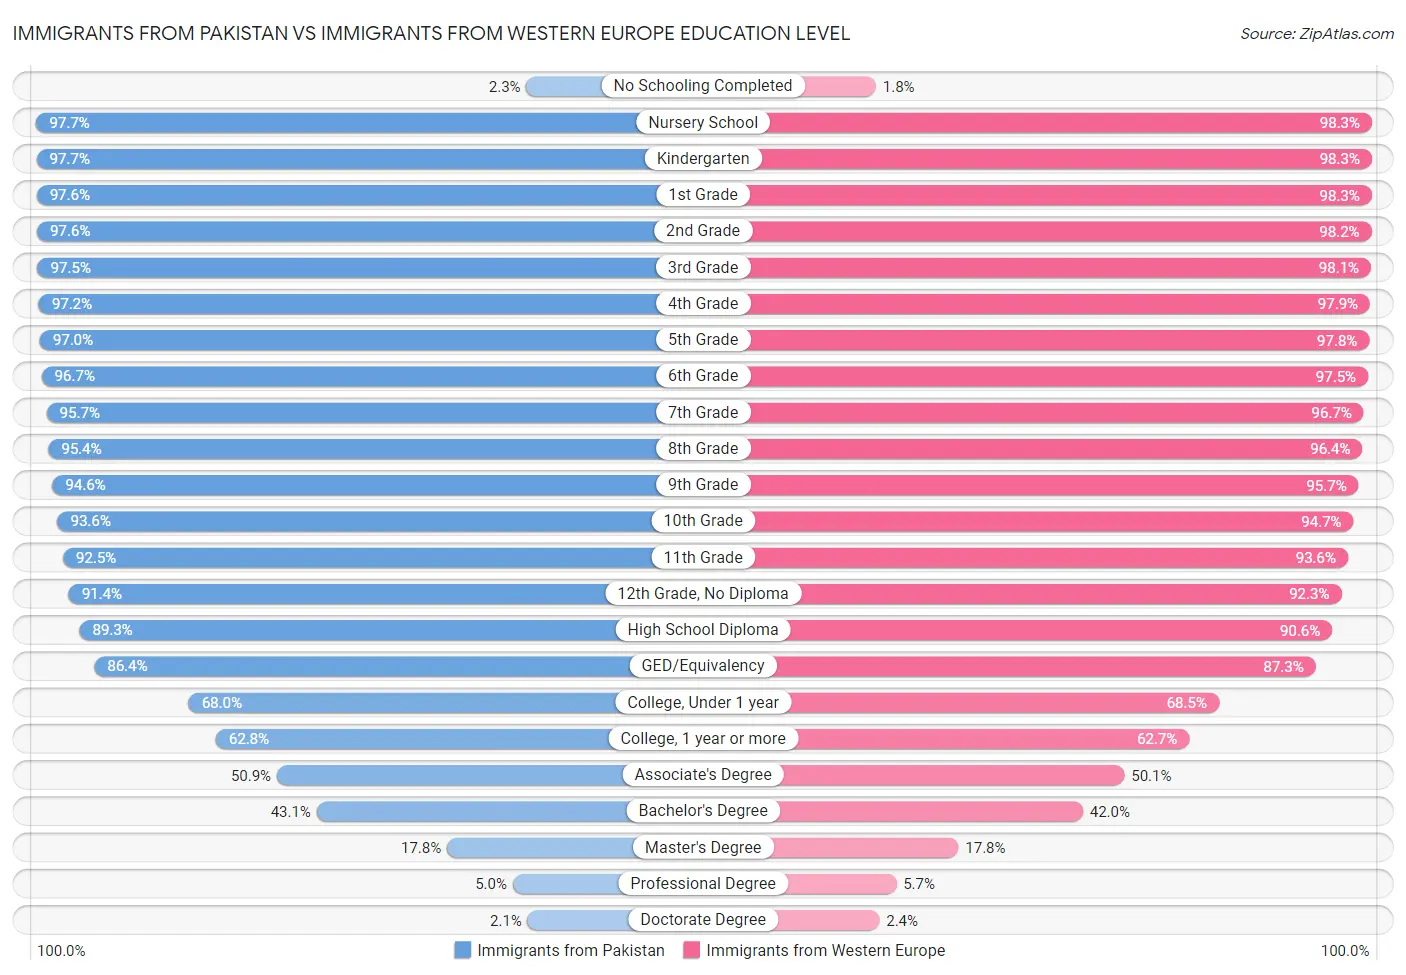 Immigrants from Pakistan vs Immigrants from Western Europe Education Level